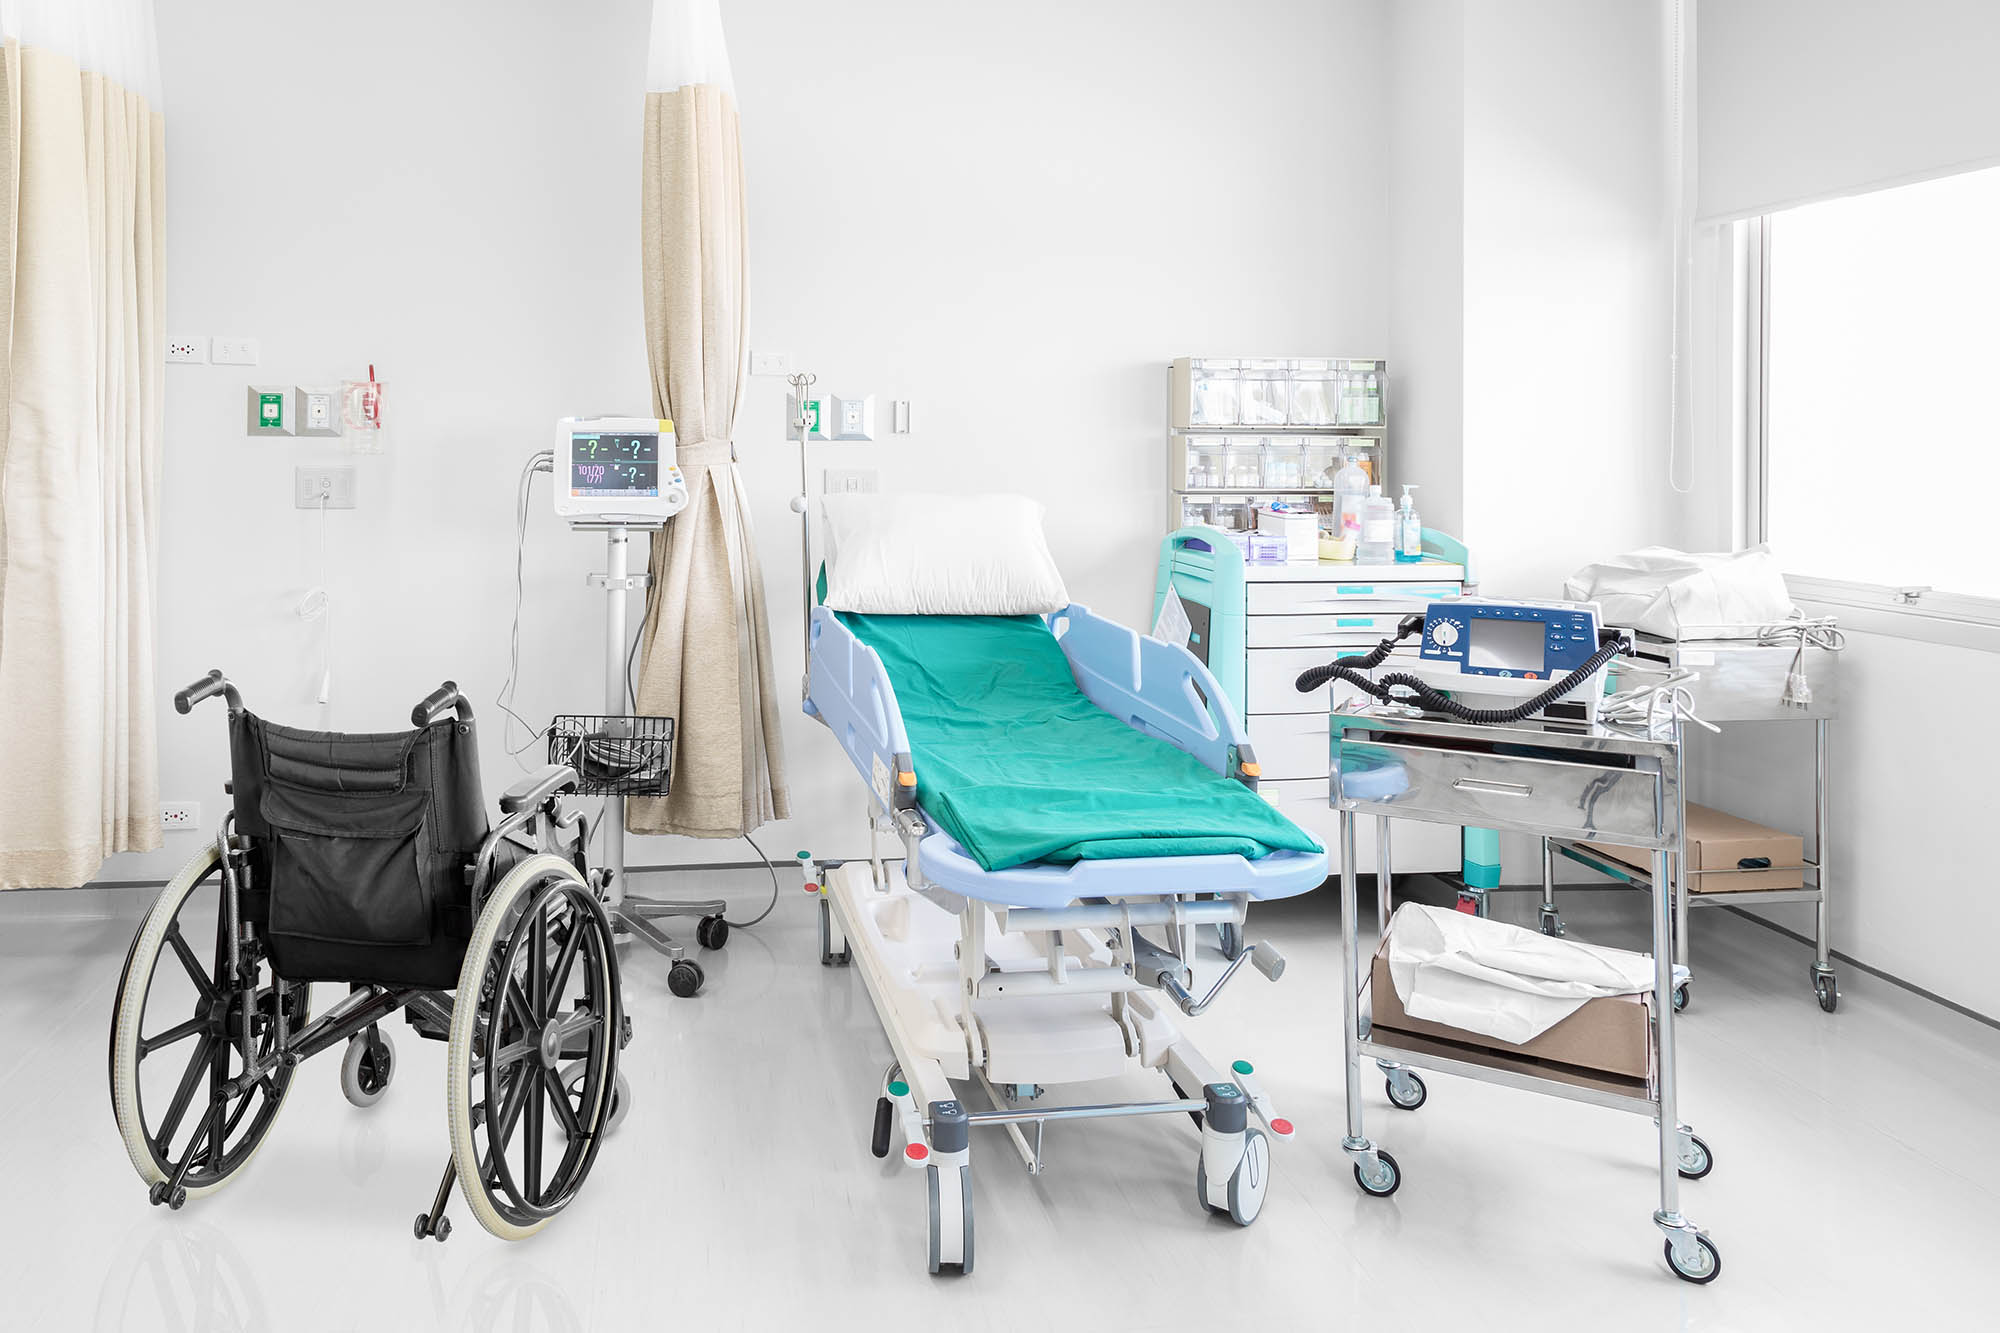 RFID Asset Tracking in Hospital